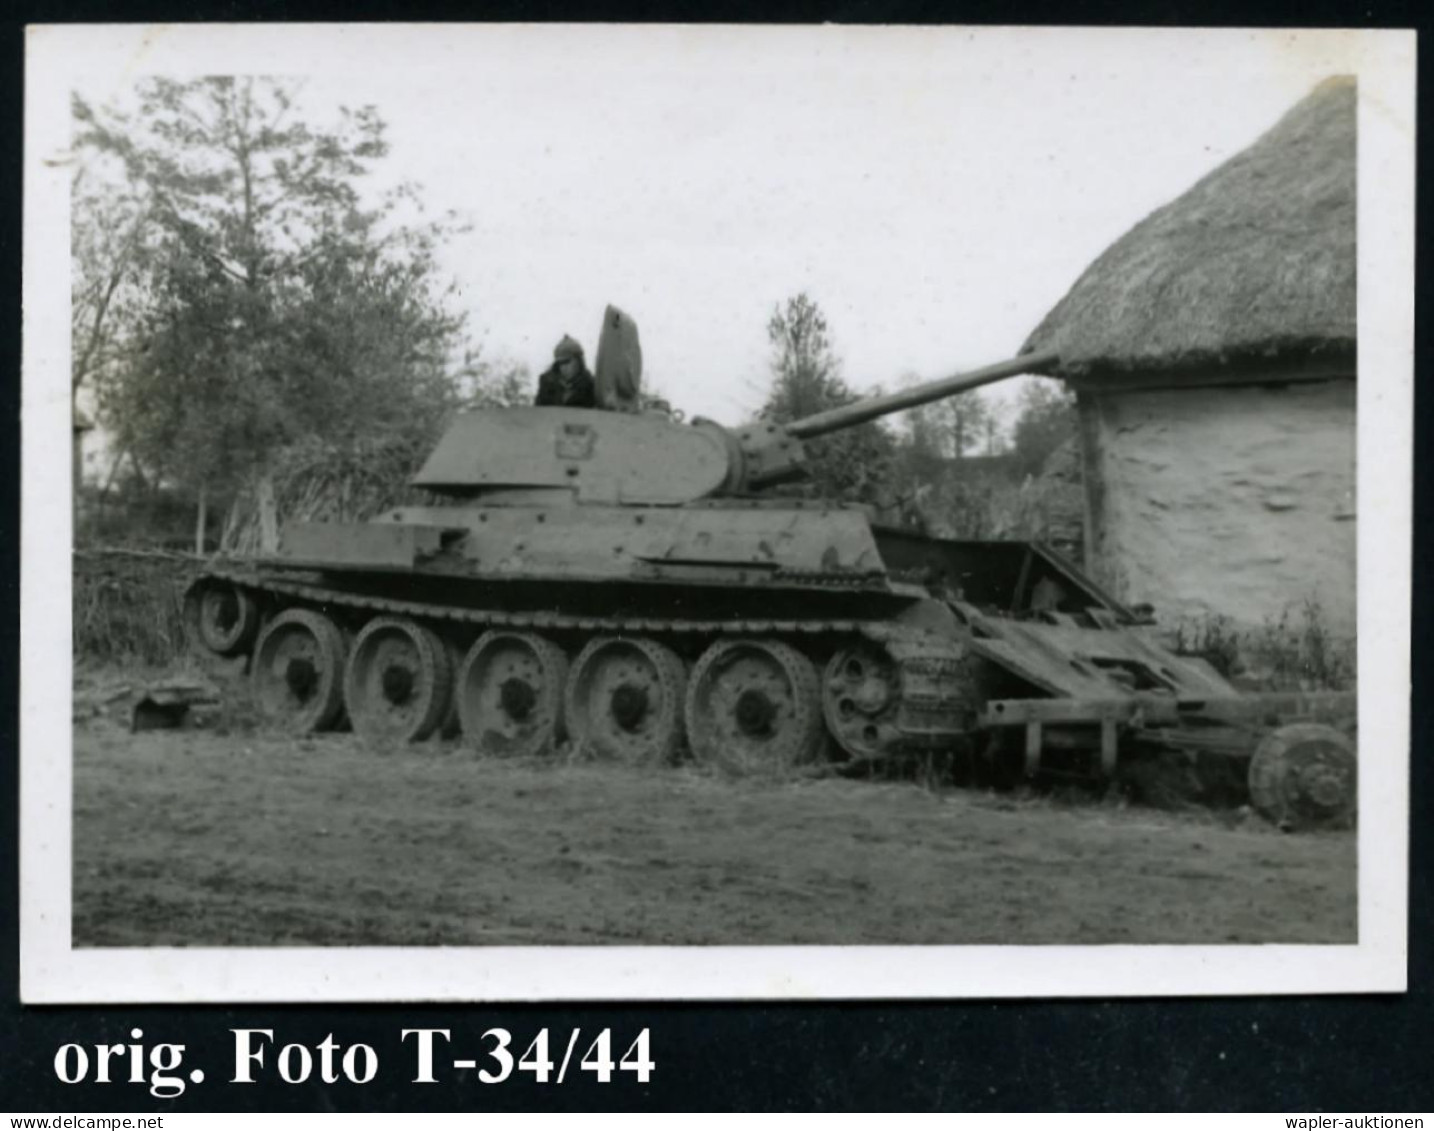 GEPANZERTE KRAFTFAHRZEUGE / PANZER - MILITARY ARMOURED VEHICLES / TANKS / TANK TROOPS - TROUPES BLINDEES / CHAR BLINDE / - Other (Earth)